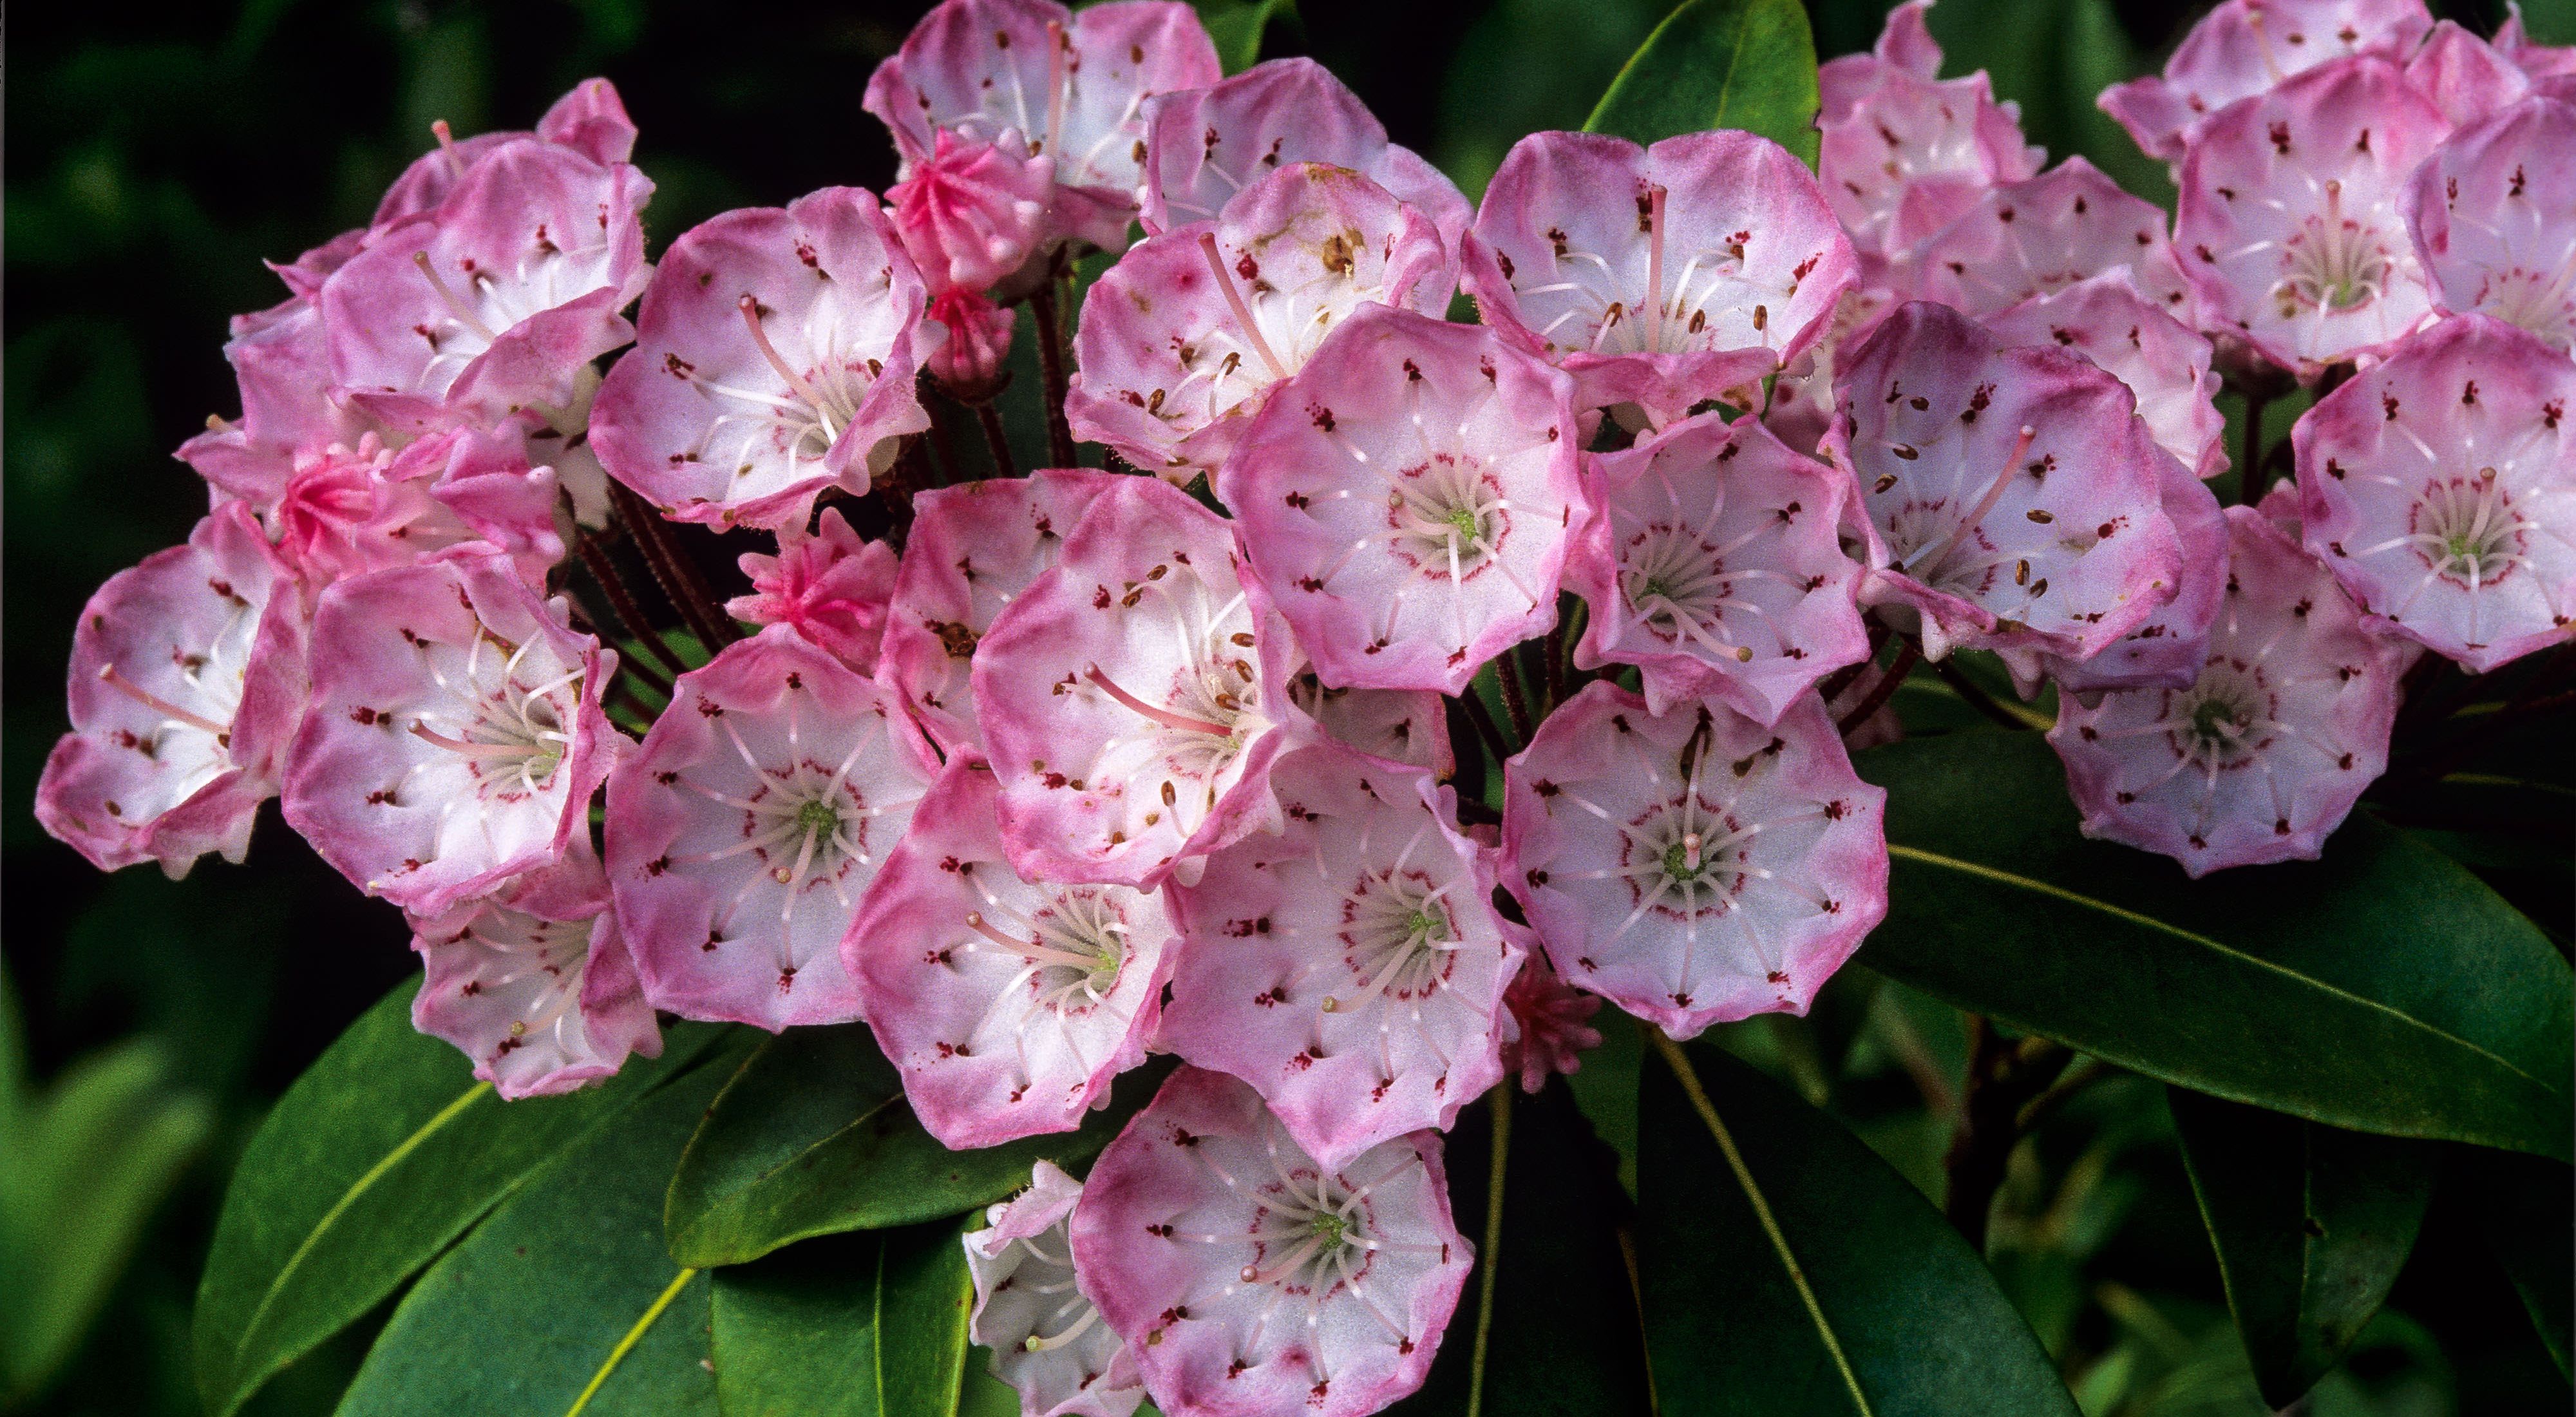 Close up view of mountain laurel in bloom. A cluster of small bowl shaped blossoms with white interiors that bloom into a deep shade of pink at the edges.